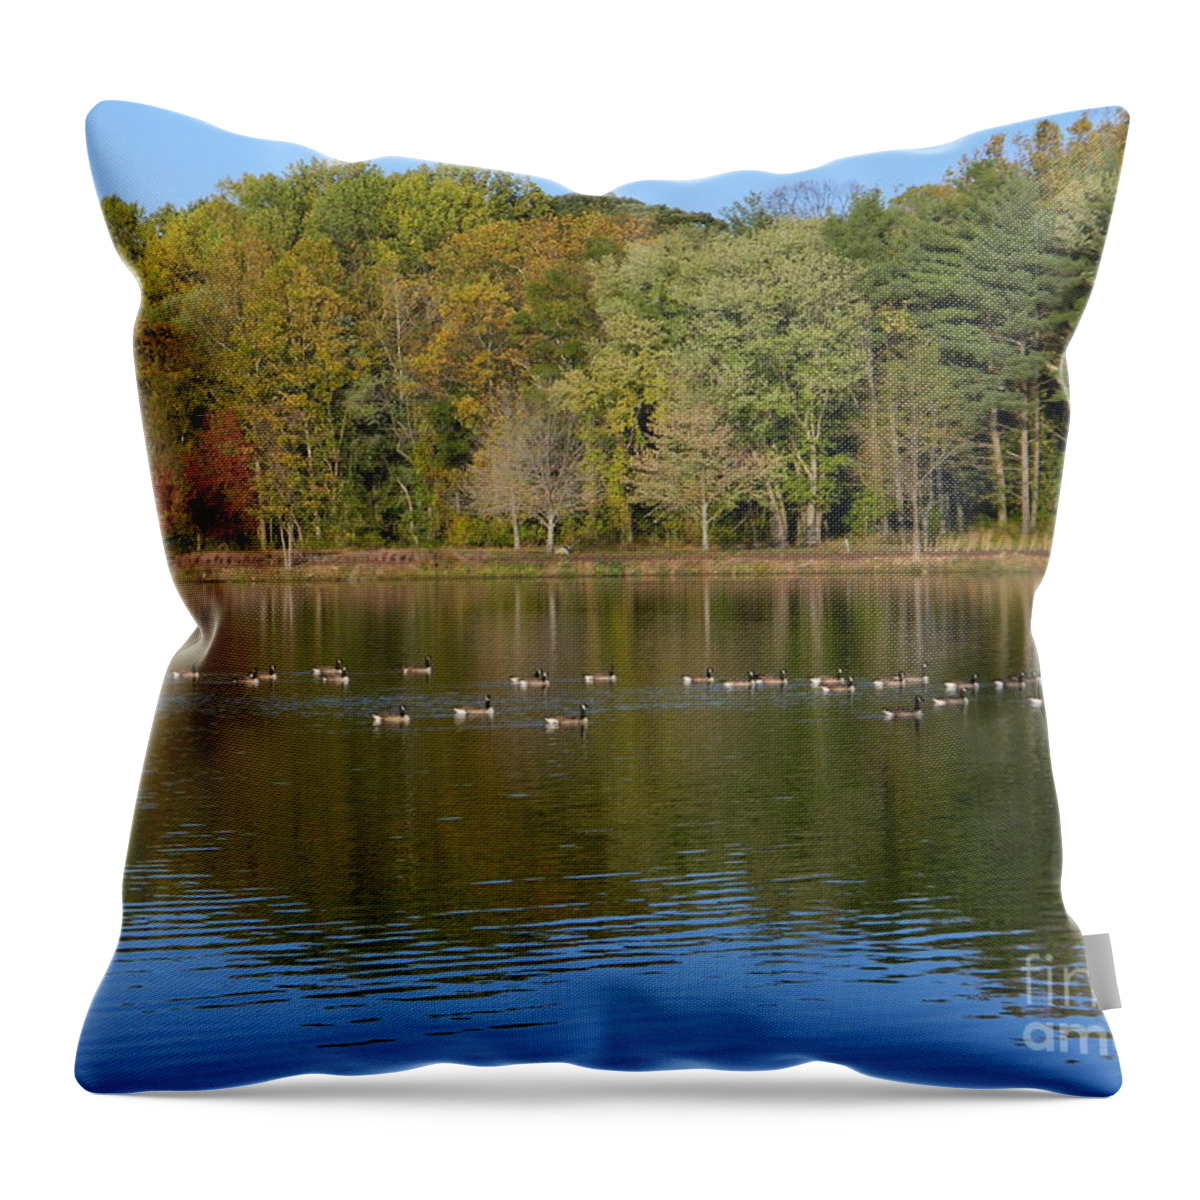 Lake Photography Throw Pillow featuring the photograph Follow The Leader by Emmy Vickers